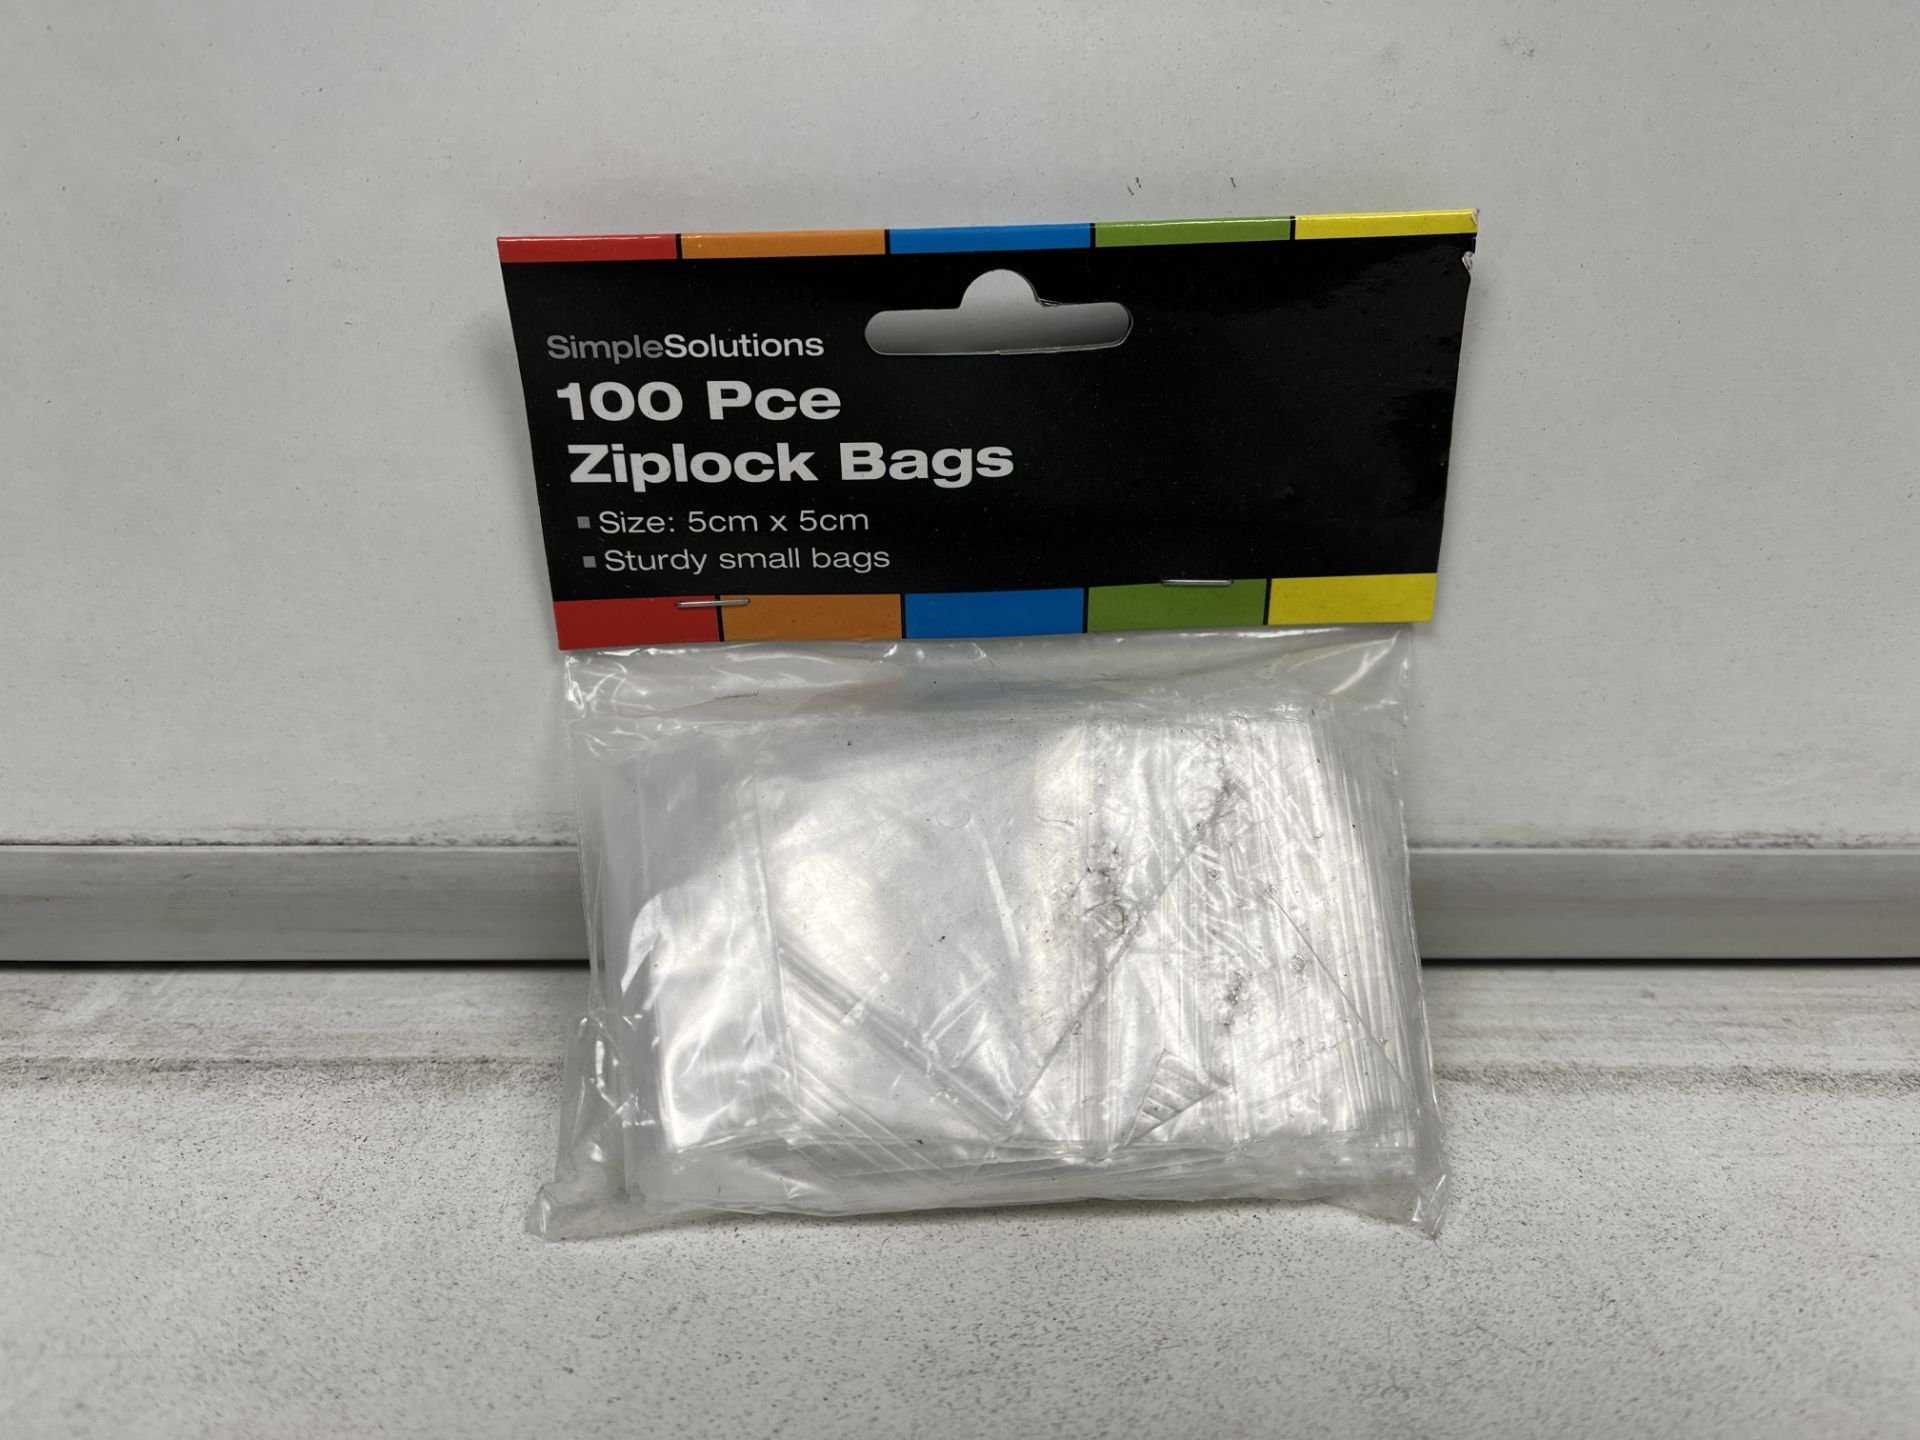 96 X NEW PACKAGED SIMPLE SOLUTIONS PACKS OF 100 ZIPLOCK BAGS. SIZE 5X5CM. STURDY DESIGN.